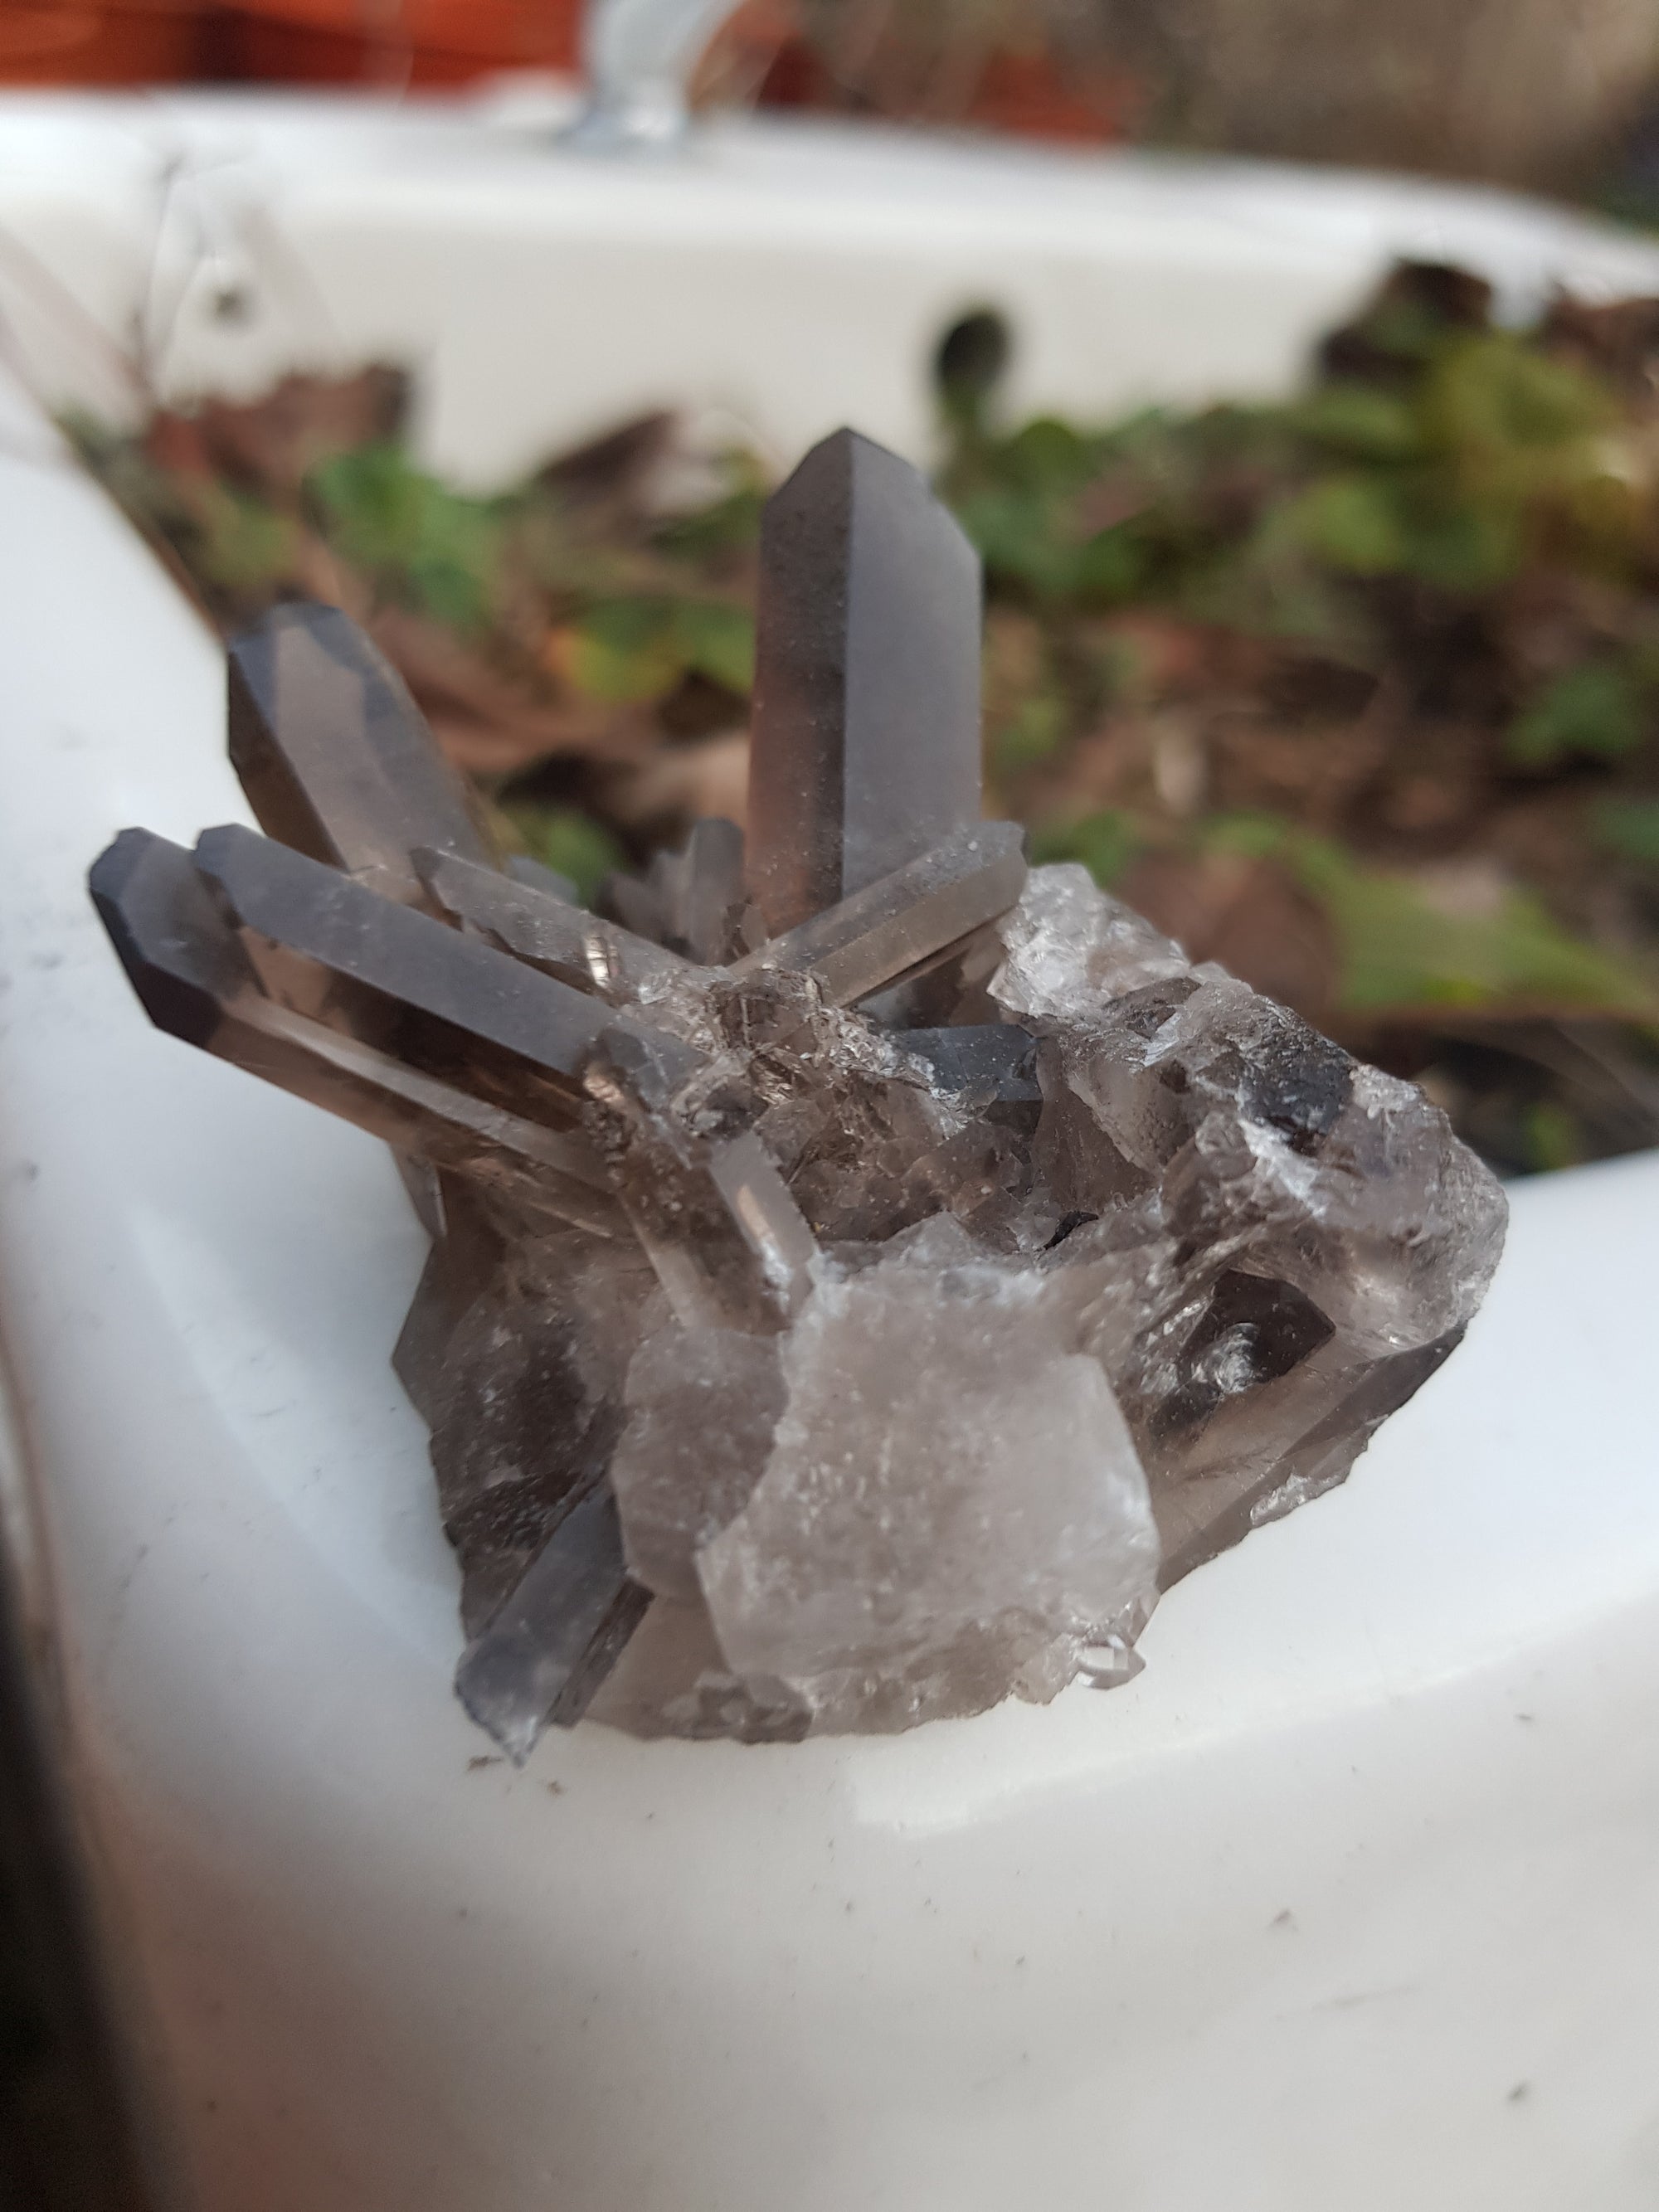 A smoky quartz cluster resting on a flower bed. The cluster consists of well formed points. They are a very dark grey.